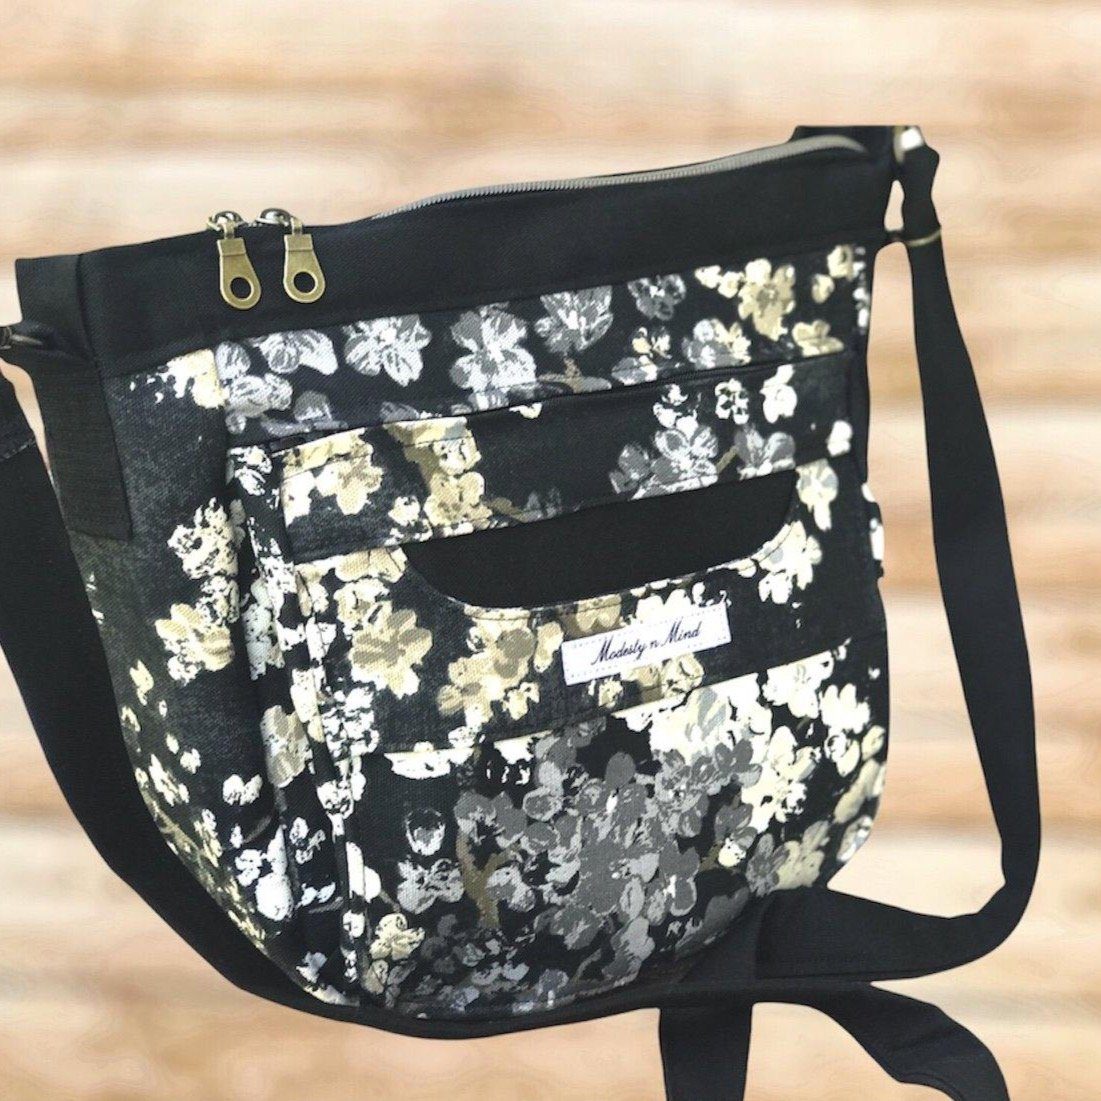 Floral & Black Casual Bag-Modesty N Mind-Made to Order,Purses